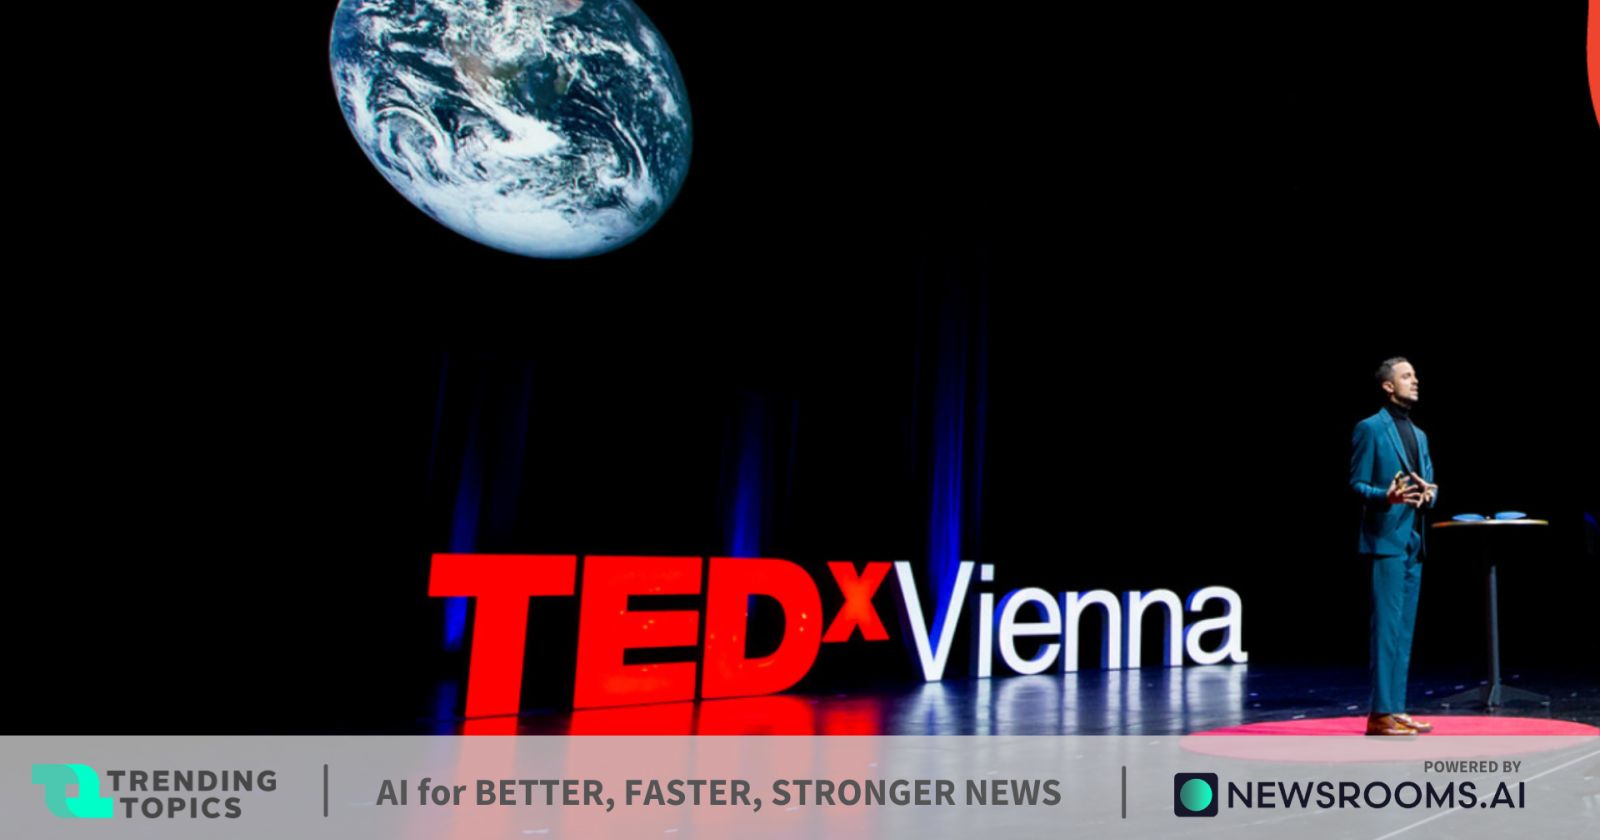 On the TEDx stage?  Here comes the opportunity